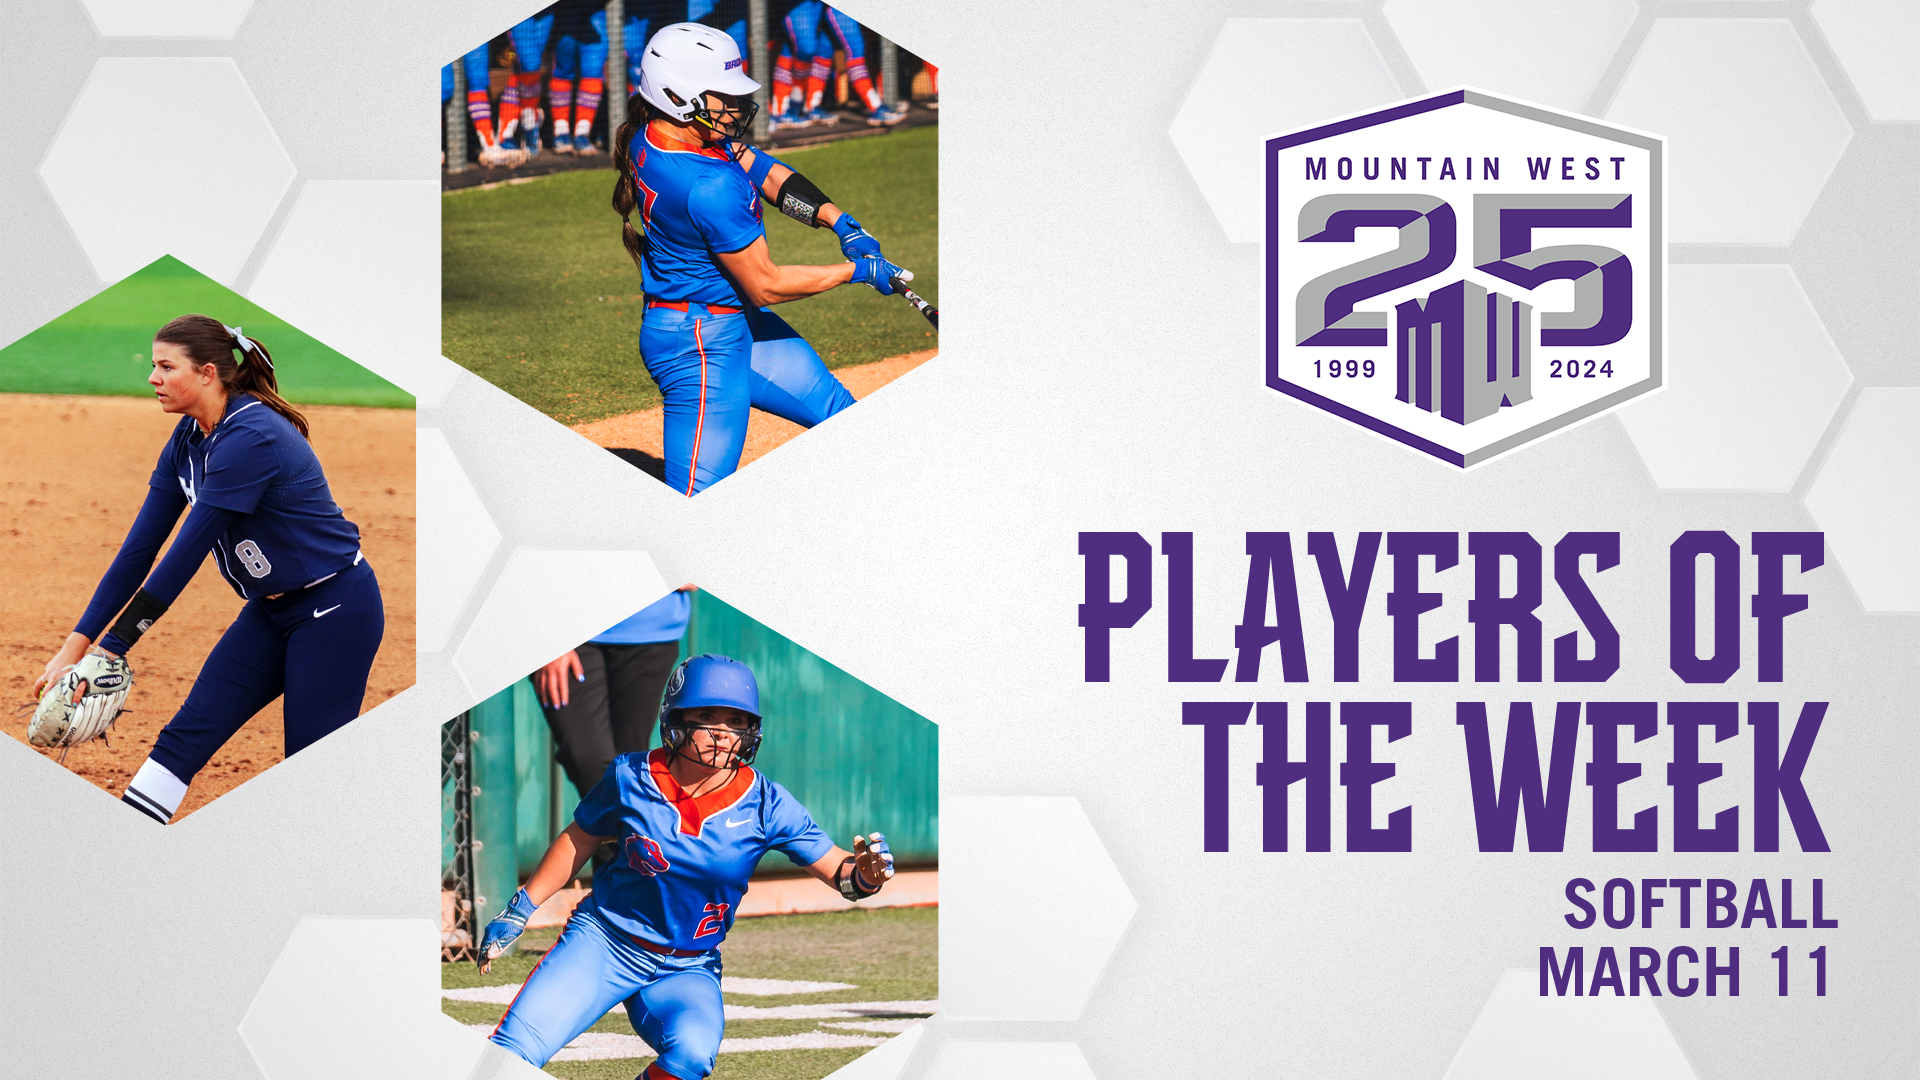 MW Softball Players of the Week - March 11